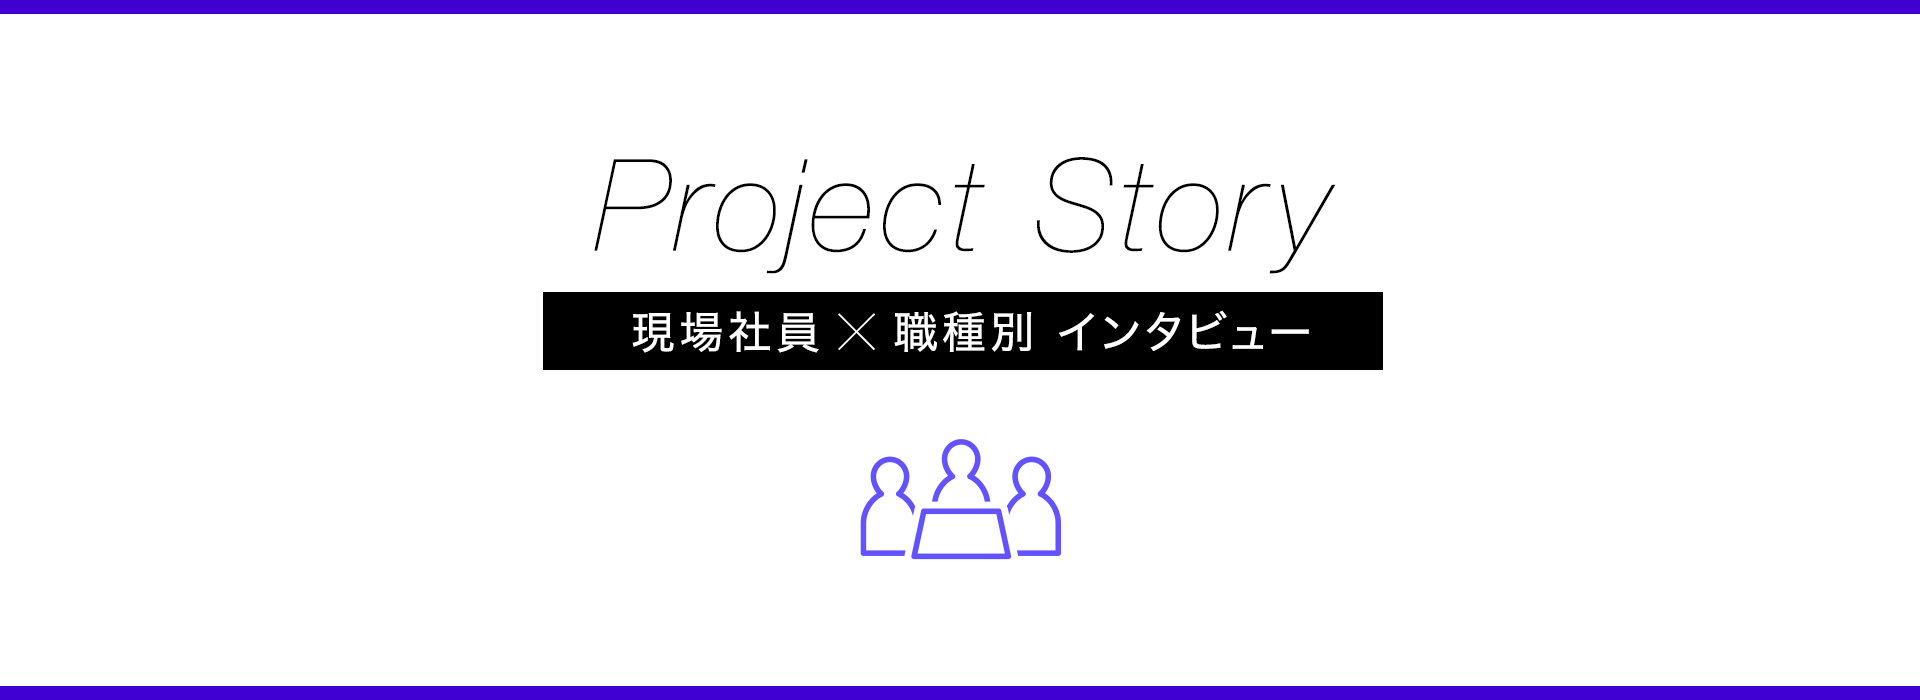 Project Story 現場社員×職種別 インタビュー